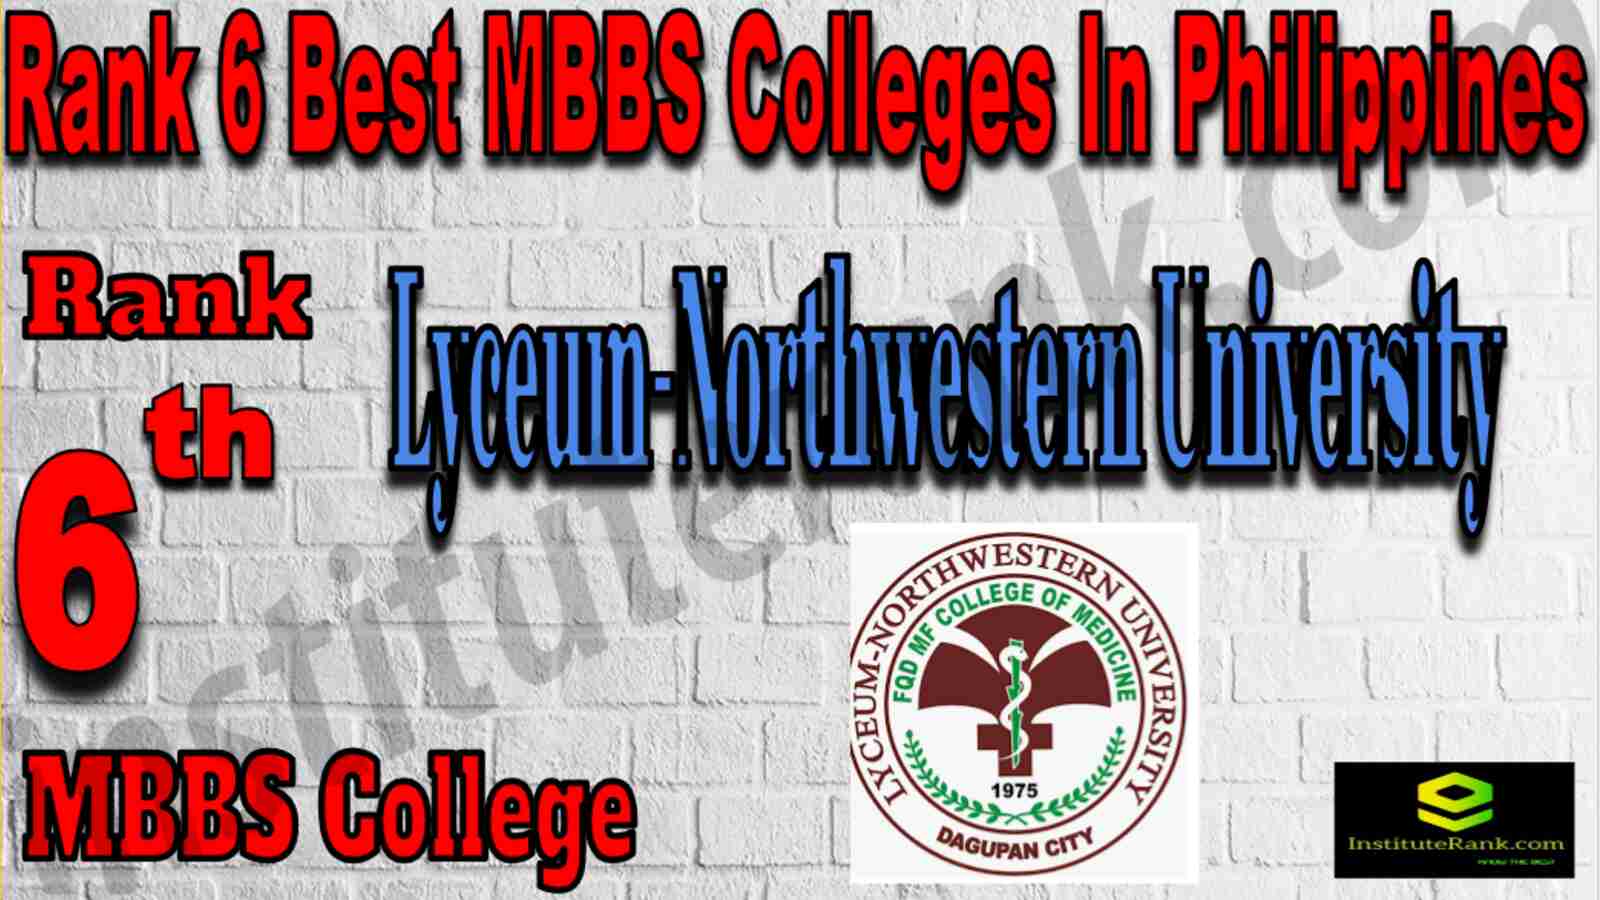 Rank 6 Best MBBS Colleges In Philippines